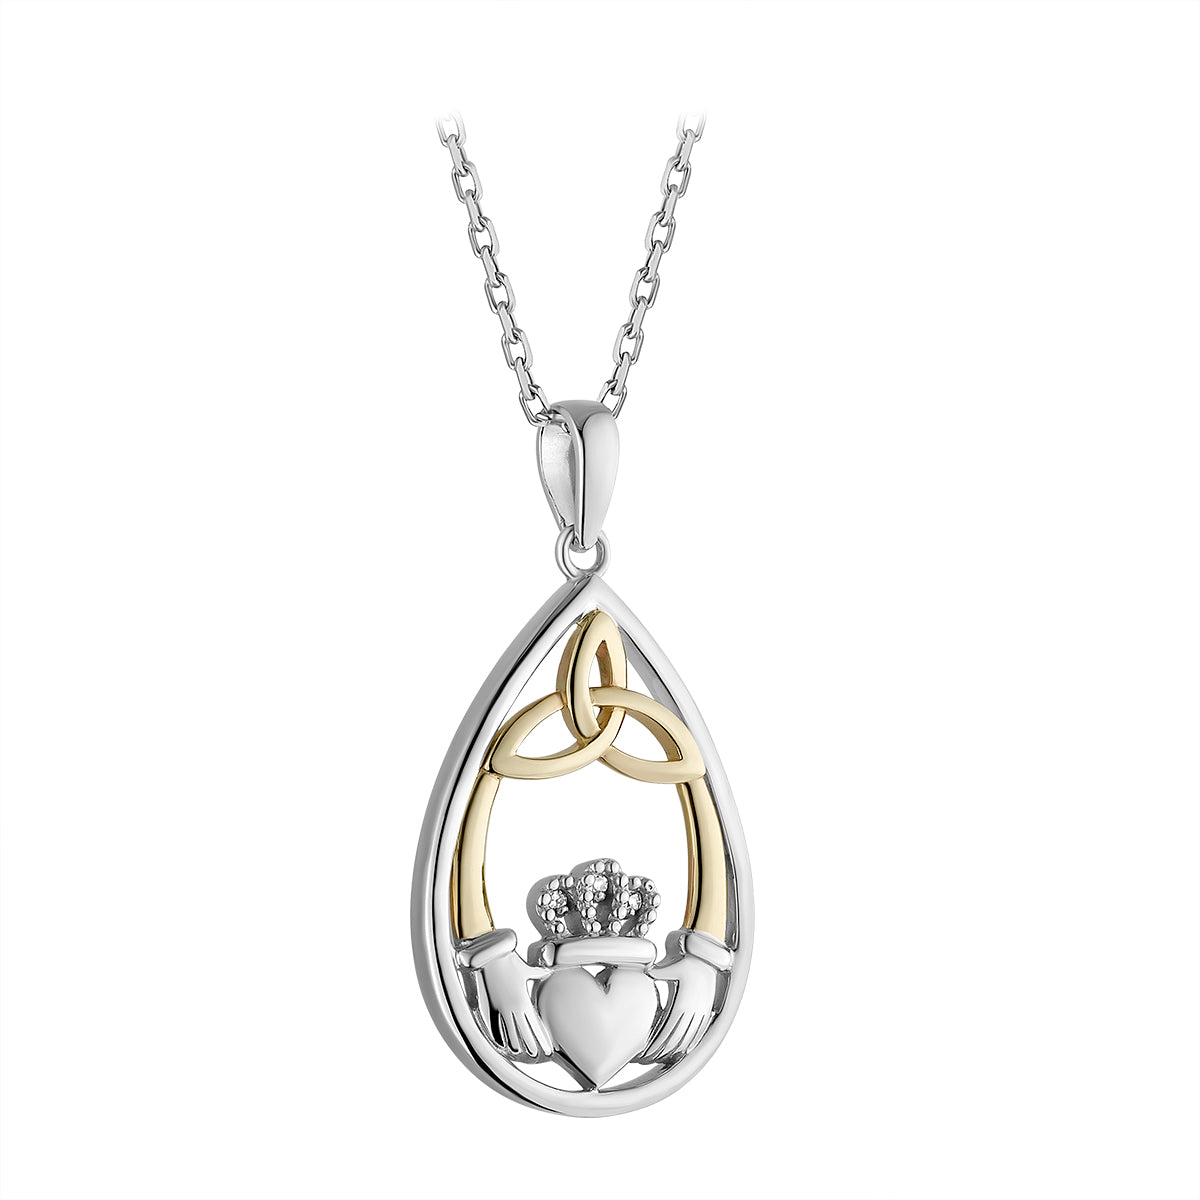 Silver & 10K Gold Diamond Oval Claddagh Necklace S46805 on 18 inch sterling silver Rolo chain from Solvar